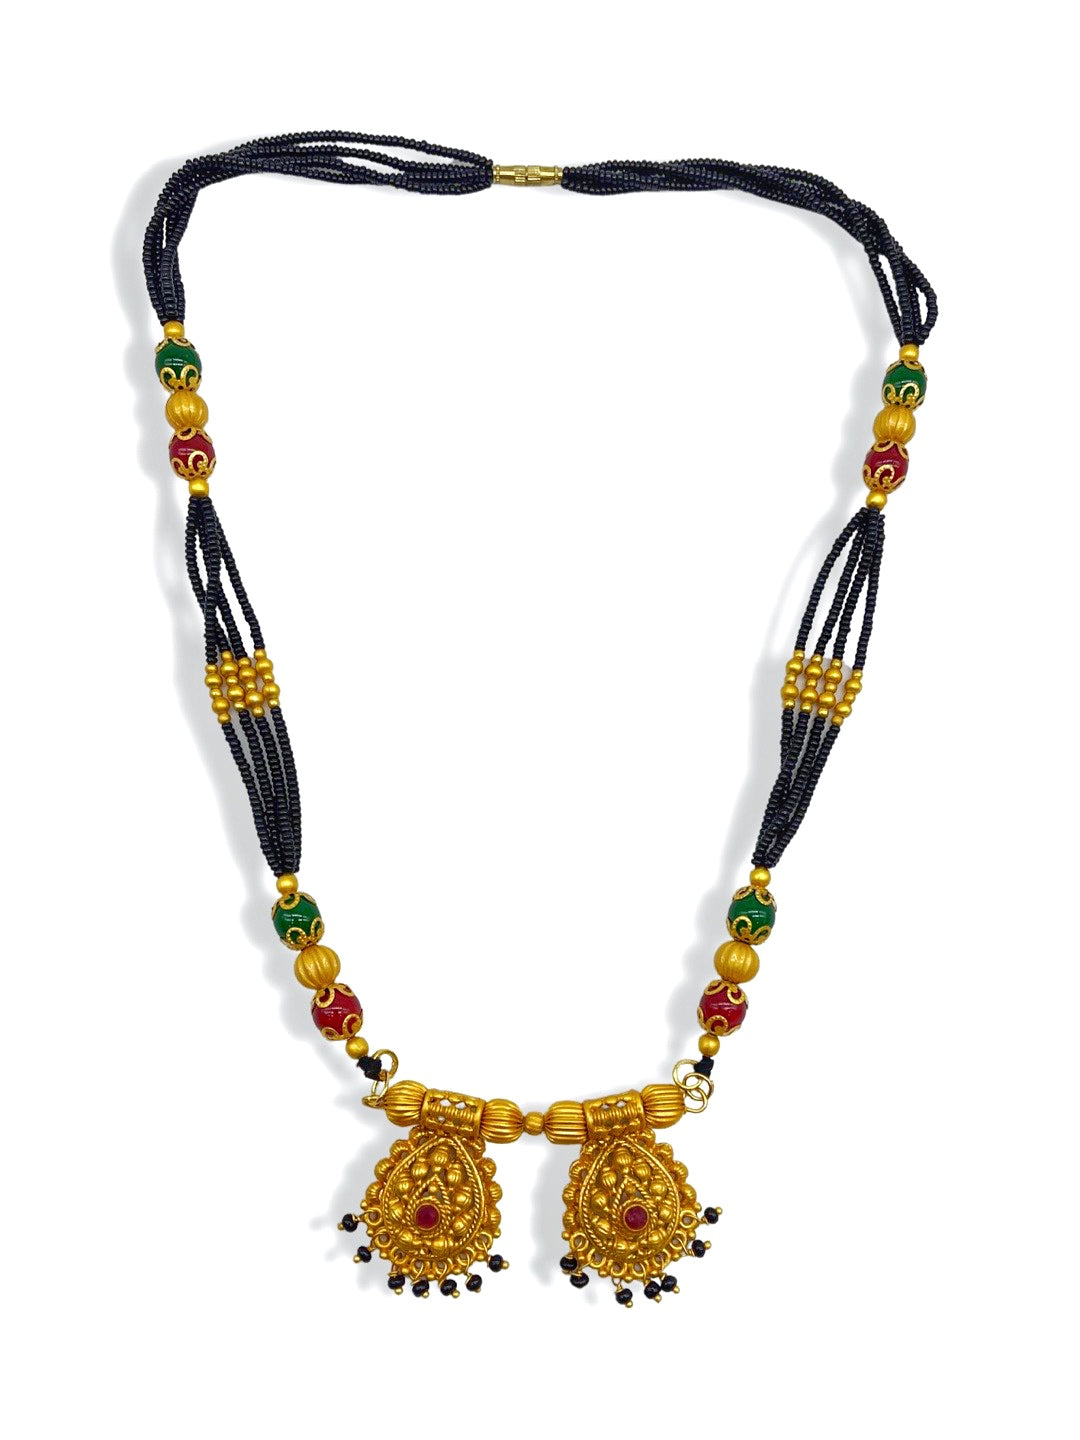 image for Short Mangalsutra Designs Gold Plated Stone Studded Vati Pendant with Multi Strands & Coloured Beads